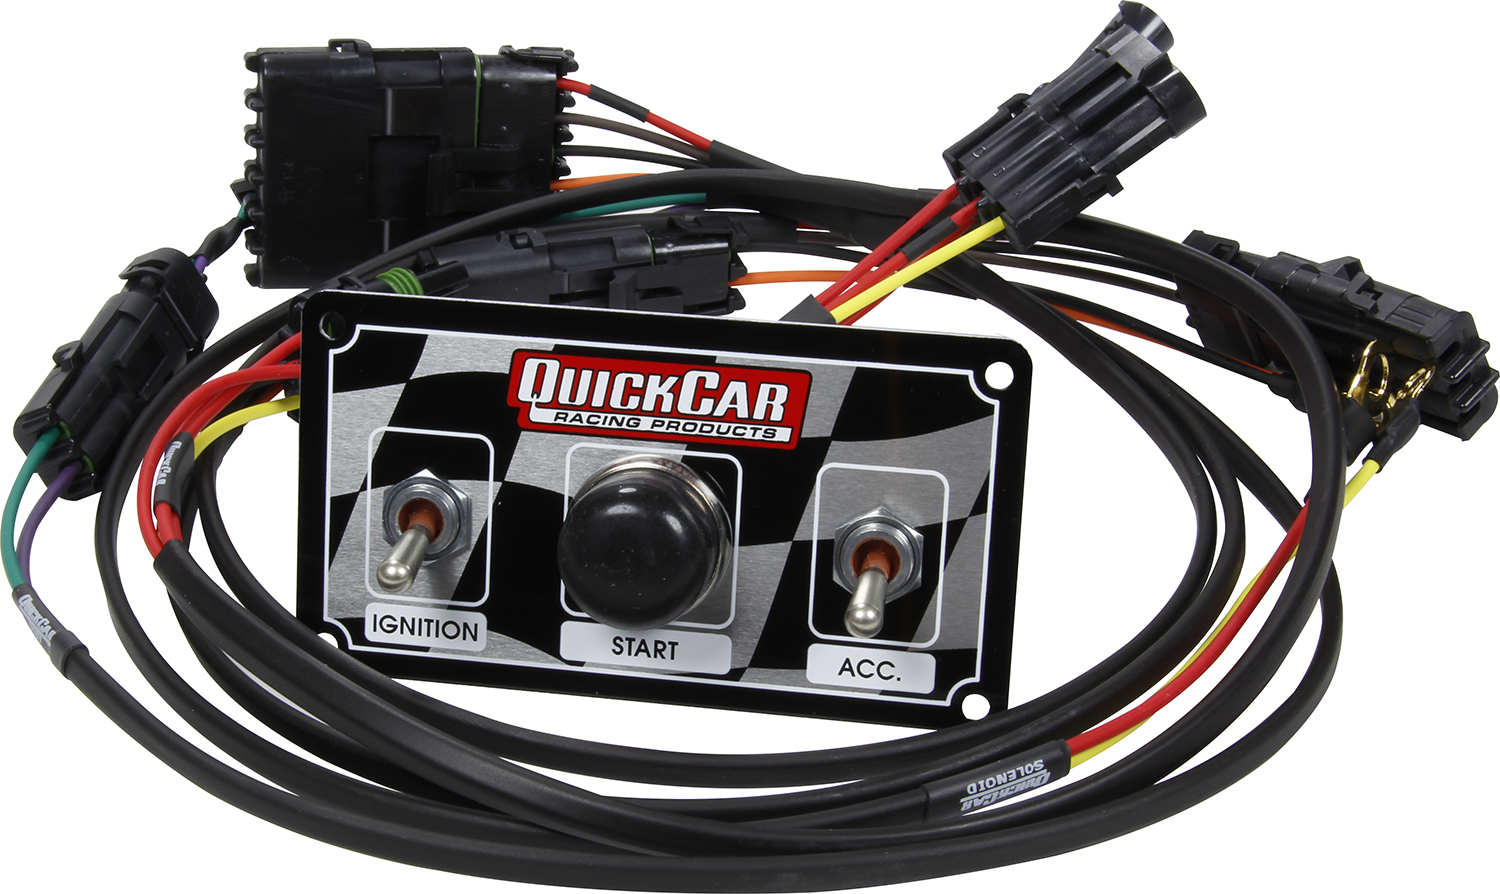 QuickCar 50-201 5' Ignition Wiring Harness HEI Distributor Switch panel wire